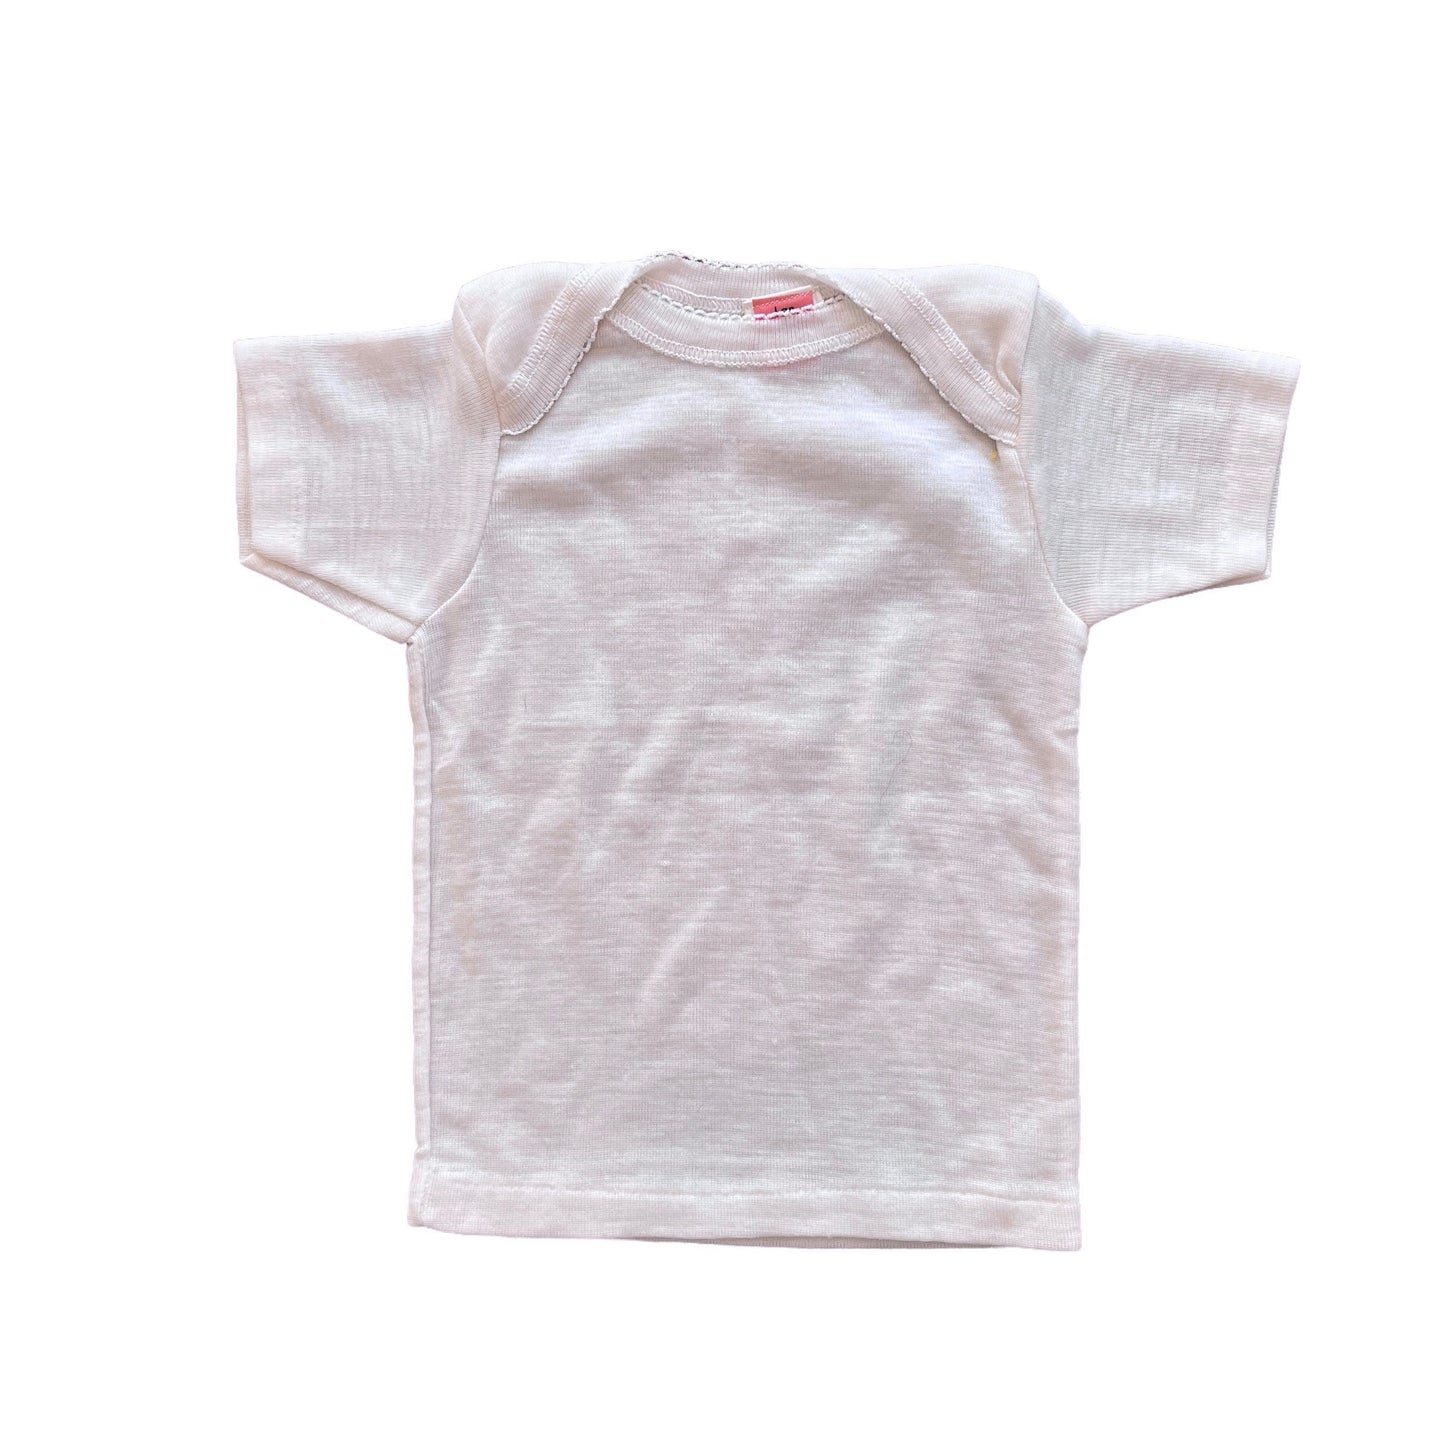 Vintage 70's White Baby Top / 6-9 Months